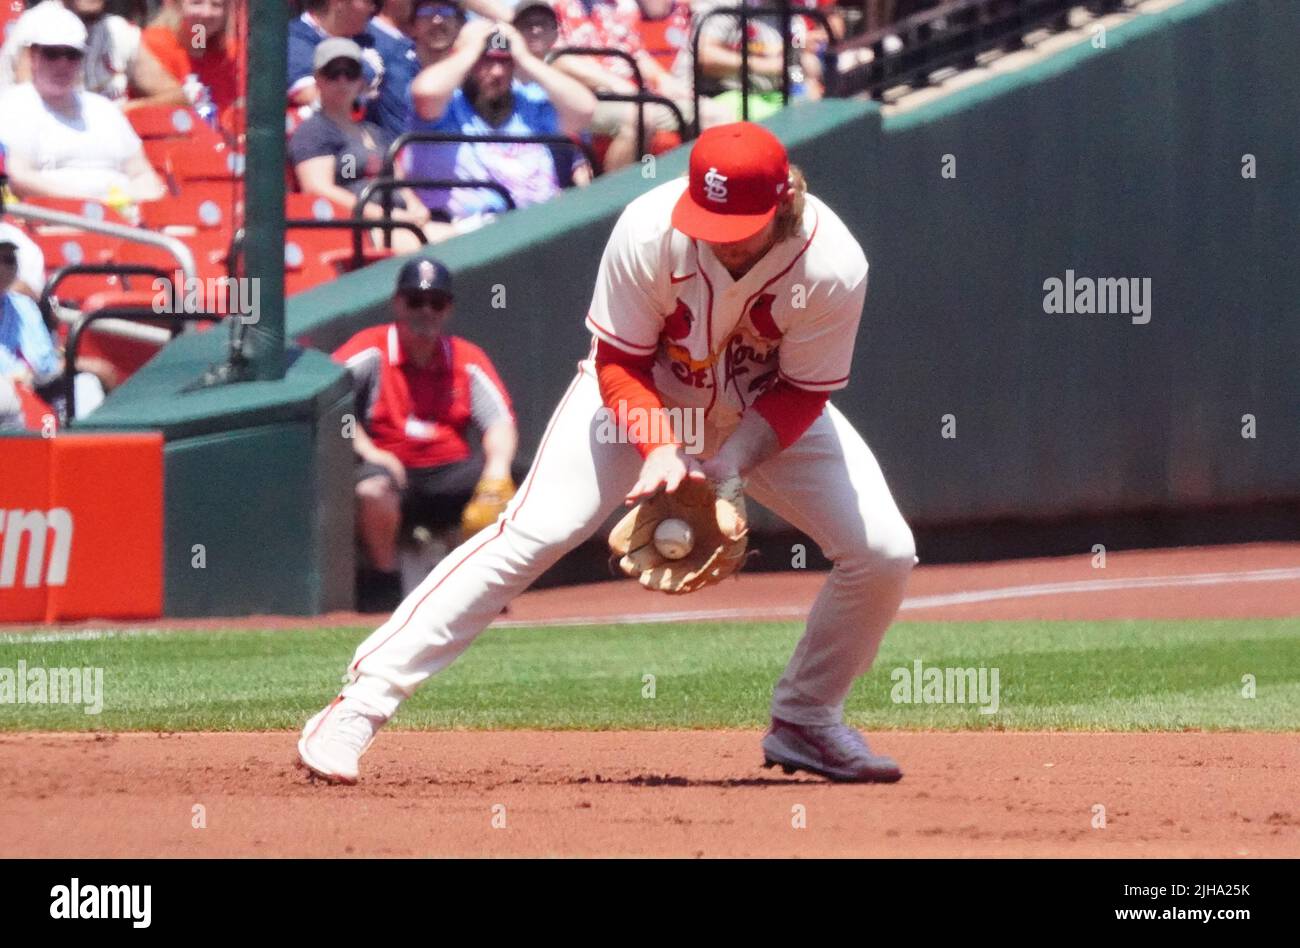 St. Louis, United States. 16th July, 2022. St. Louis Cardinals third baseman Brendan Donovan fields the baseball off the bat of Cincinnati Reds Brendan Drury in the first inning at Busch Stadium in St. Louis on Saturday, July 16, 2022. Photo by Bill Greenblatt/UPI Credit: UPI/Alamy Live News Stock Photo